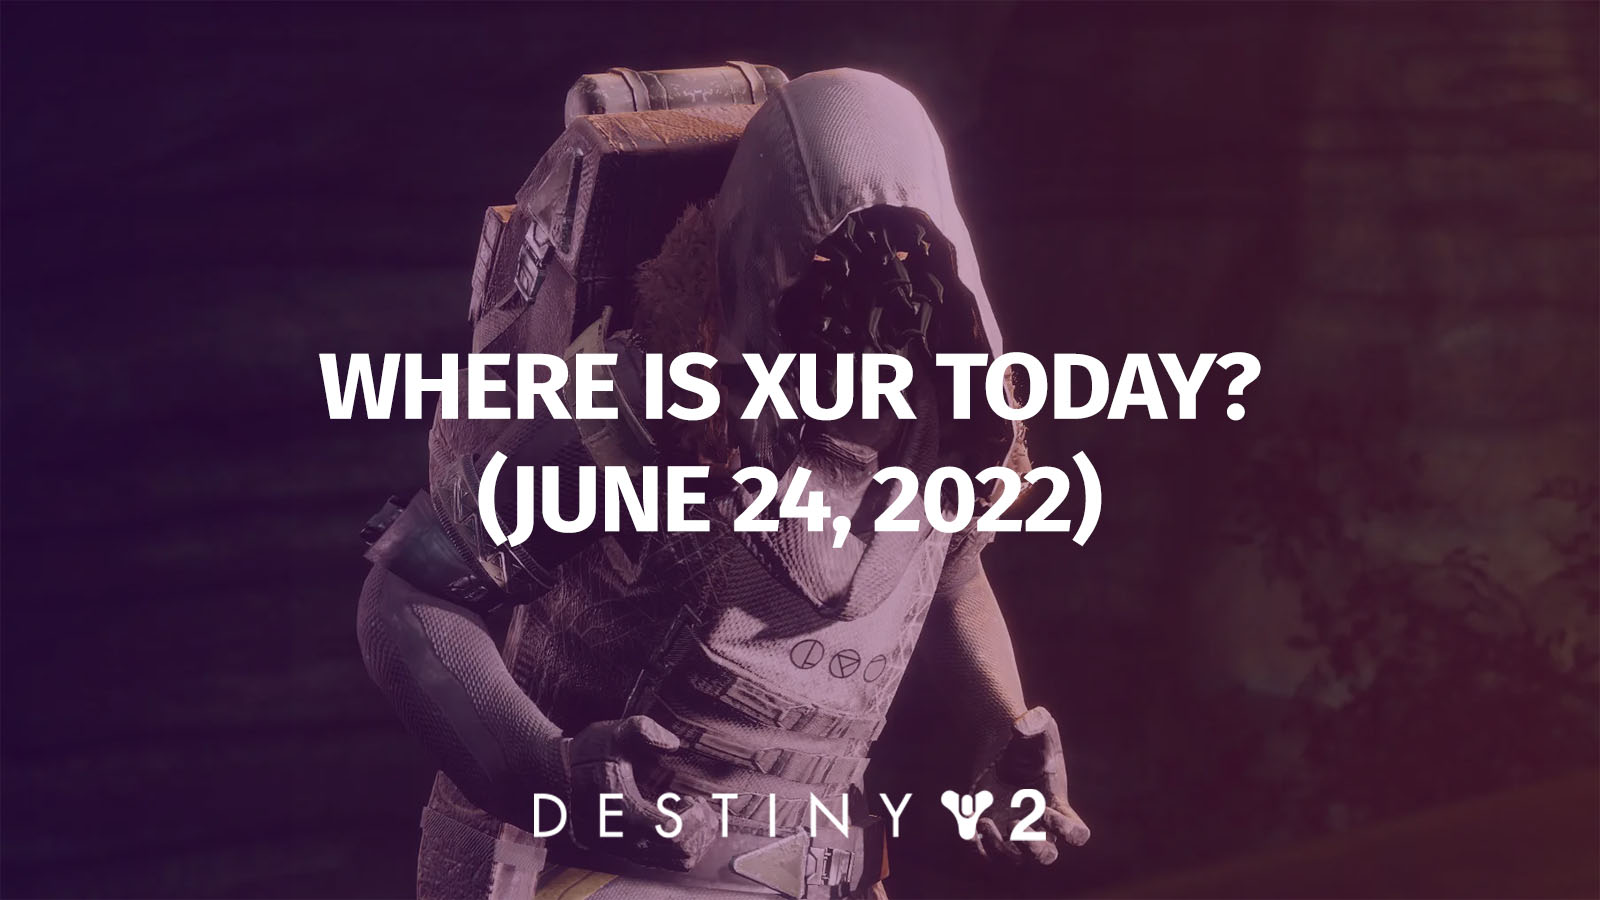 Destiny 2: Where Is Xur Today? Exotic Inventory (June 24 – June 28, 2022)